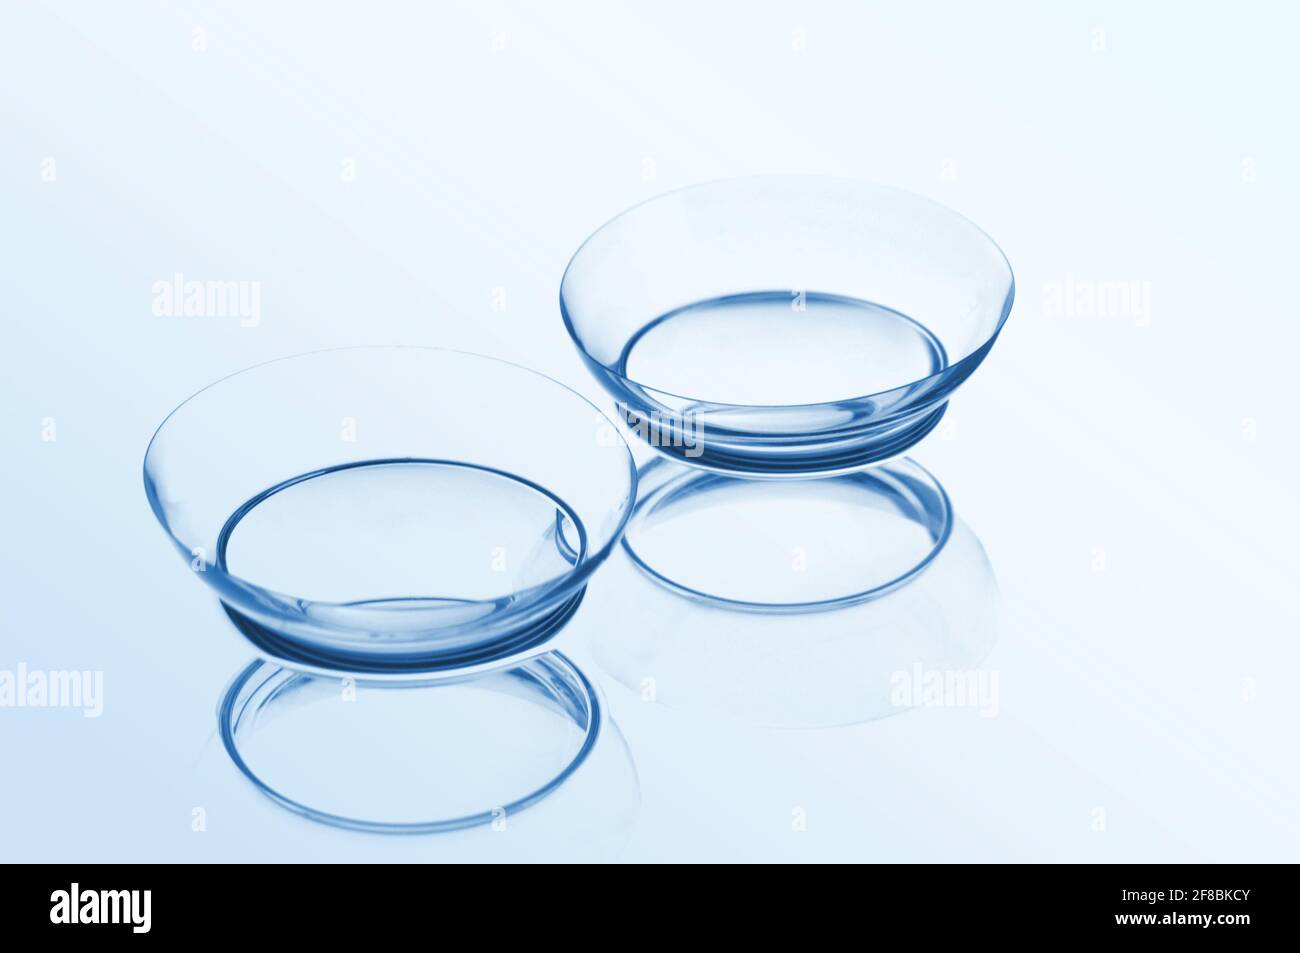 Two contact lenses with reflections on a blue background. Focus on long-distance lens. Stock Photo